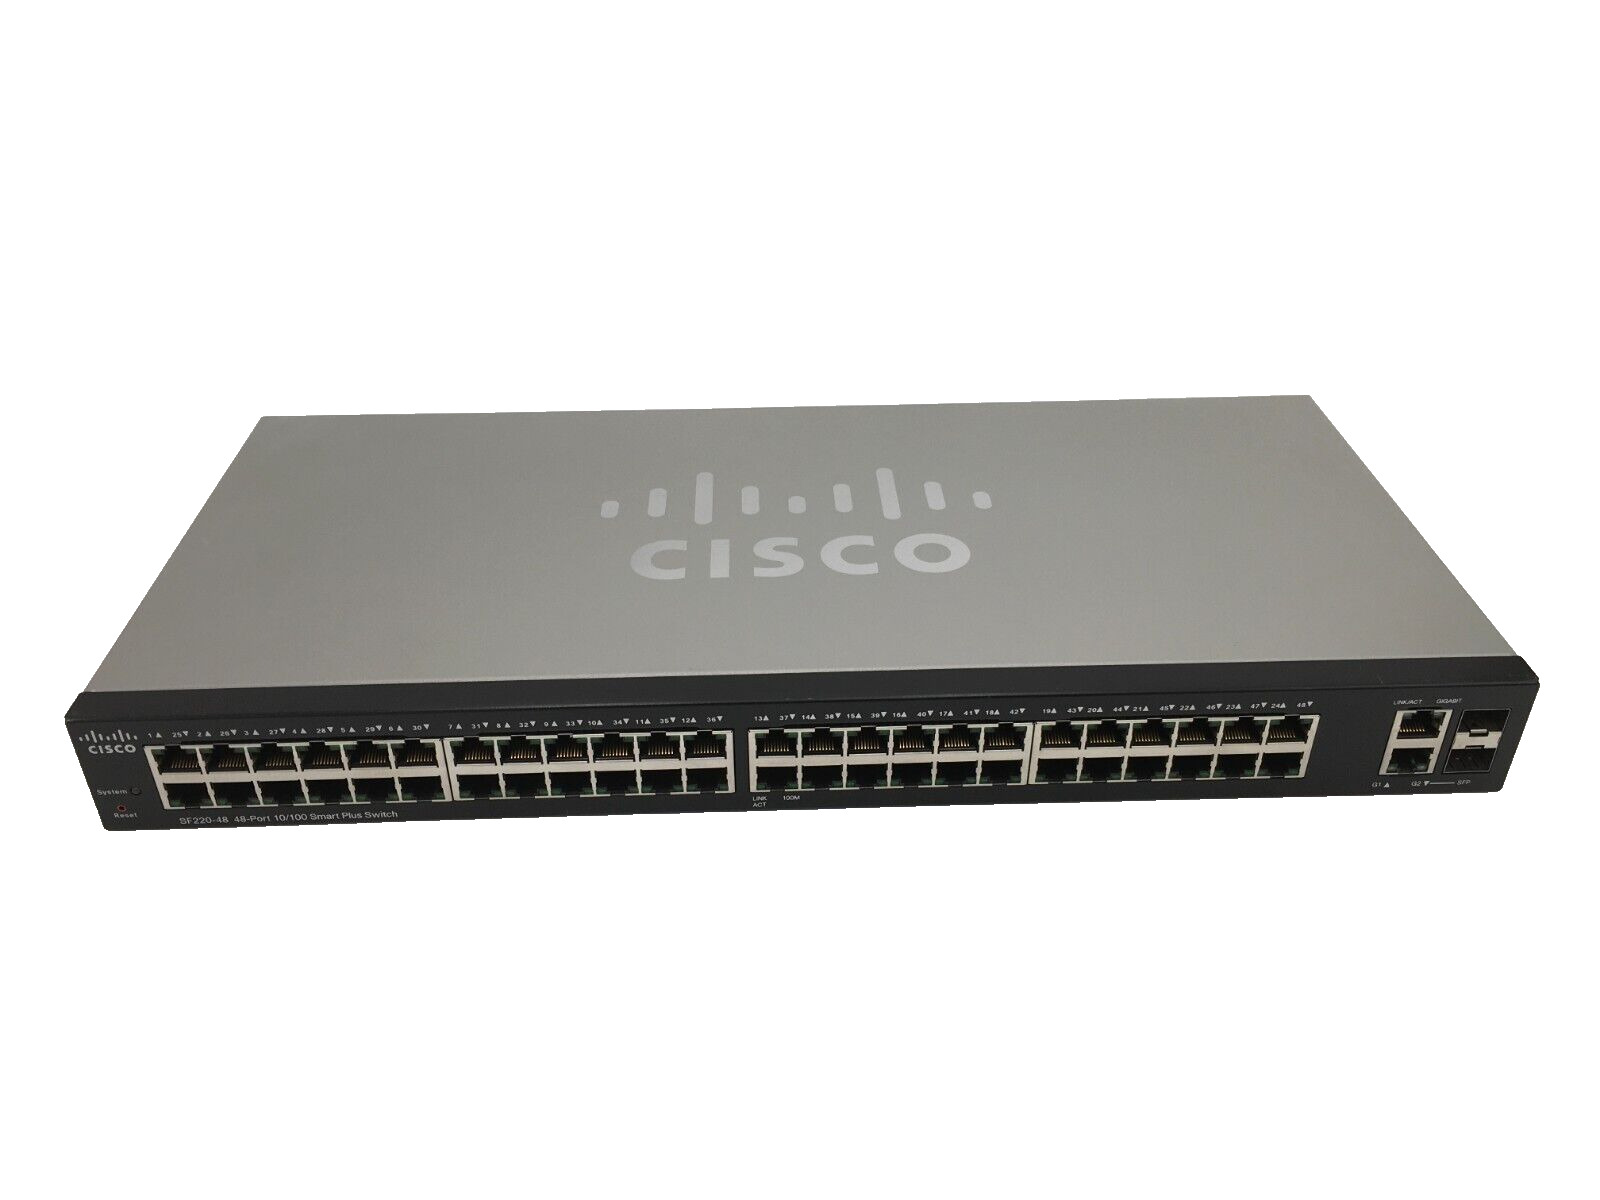 Tested Cisco SF220-48 48-Port 10/100 Smart Switch SF220-48-K9 V02 Mint Condition